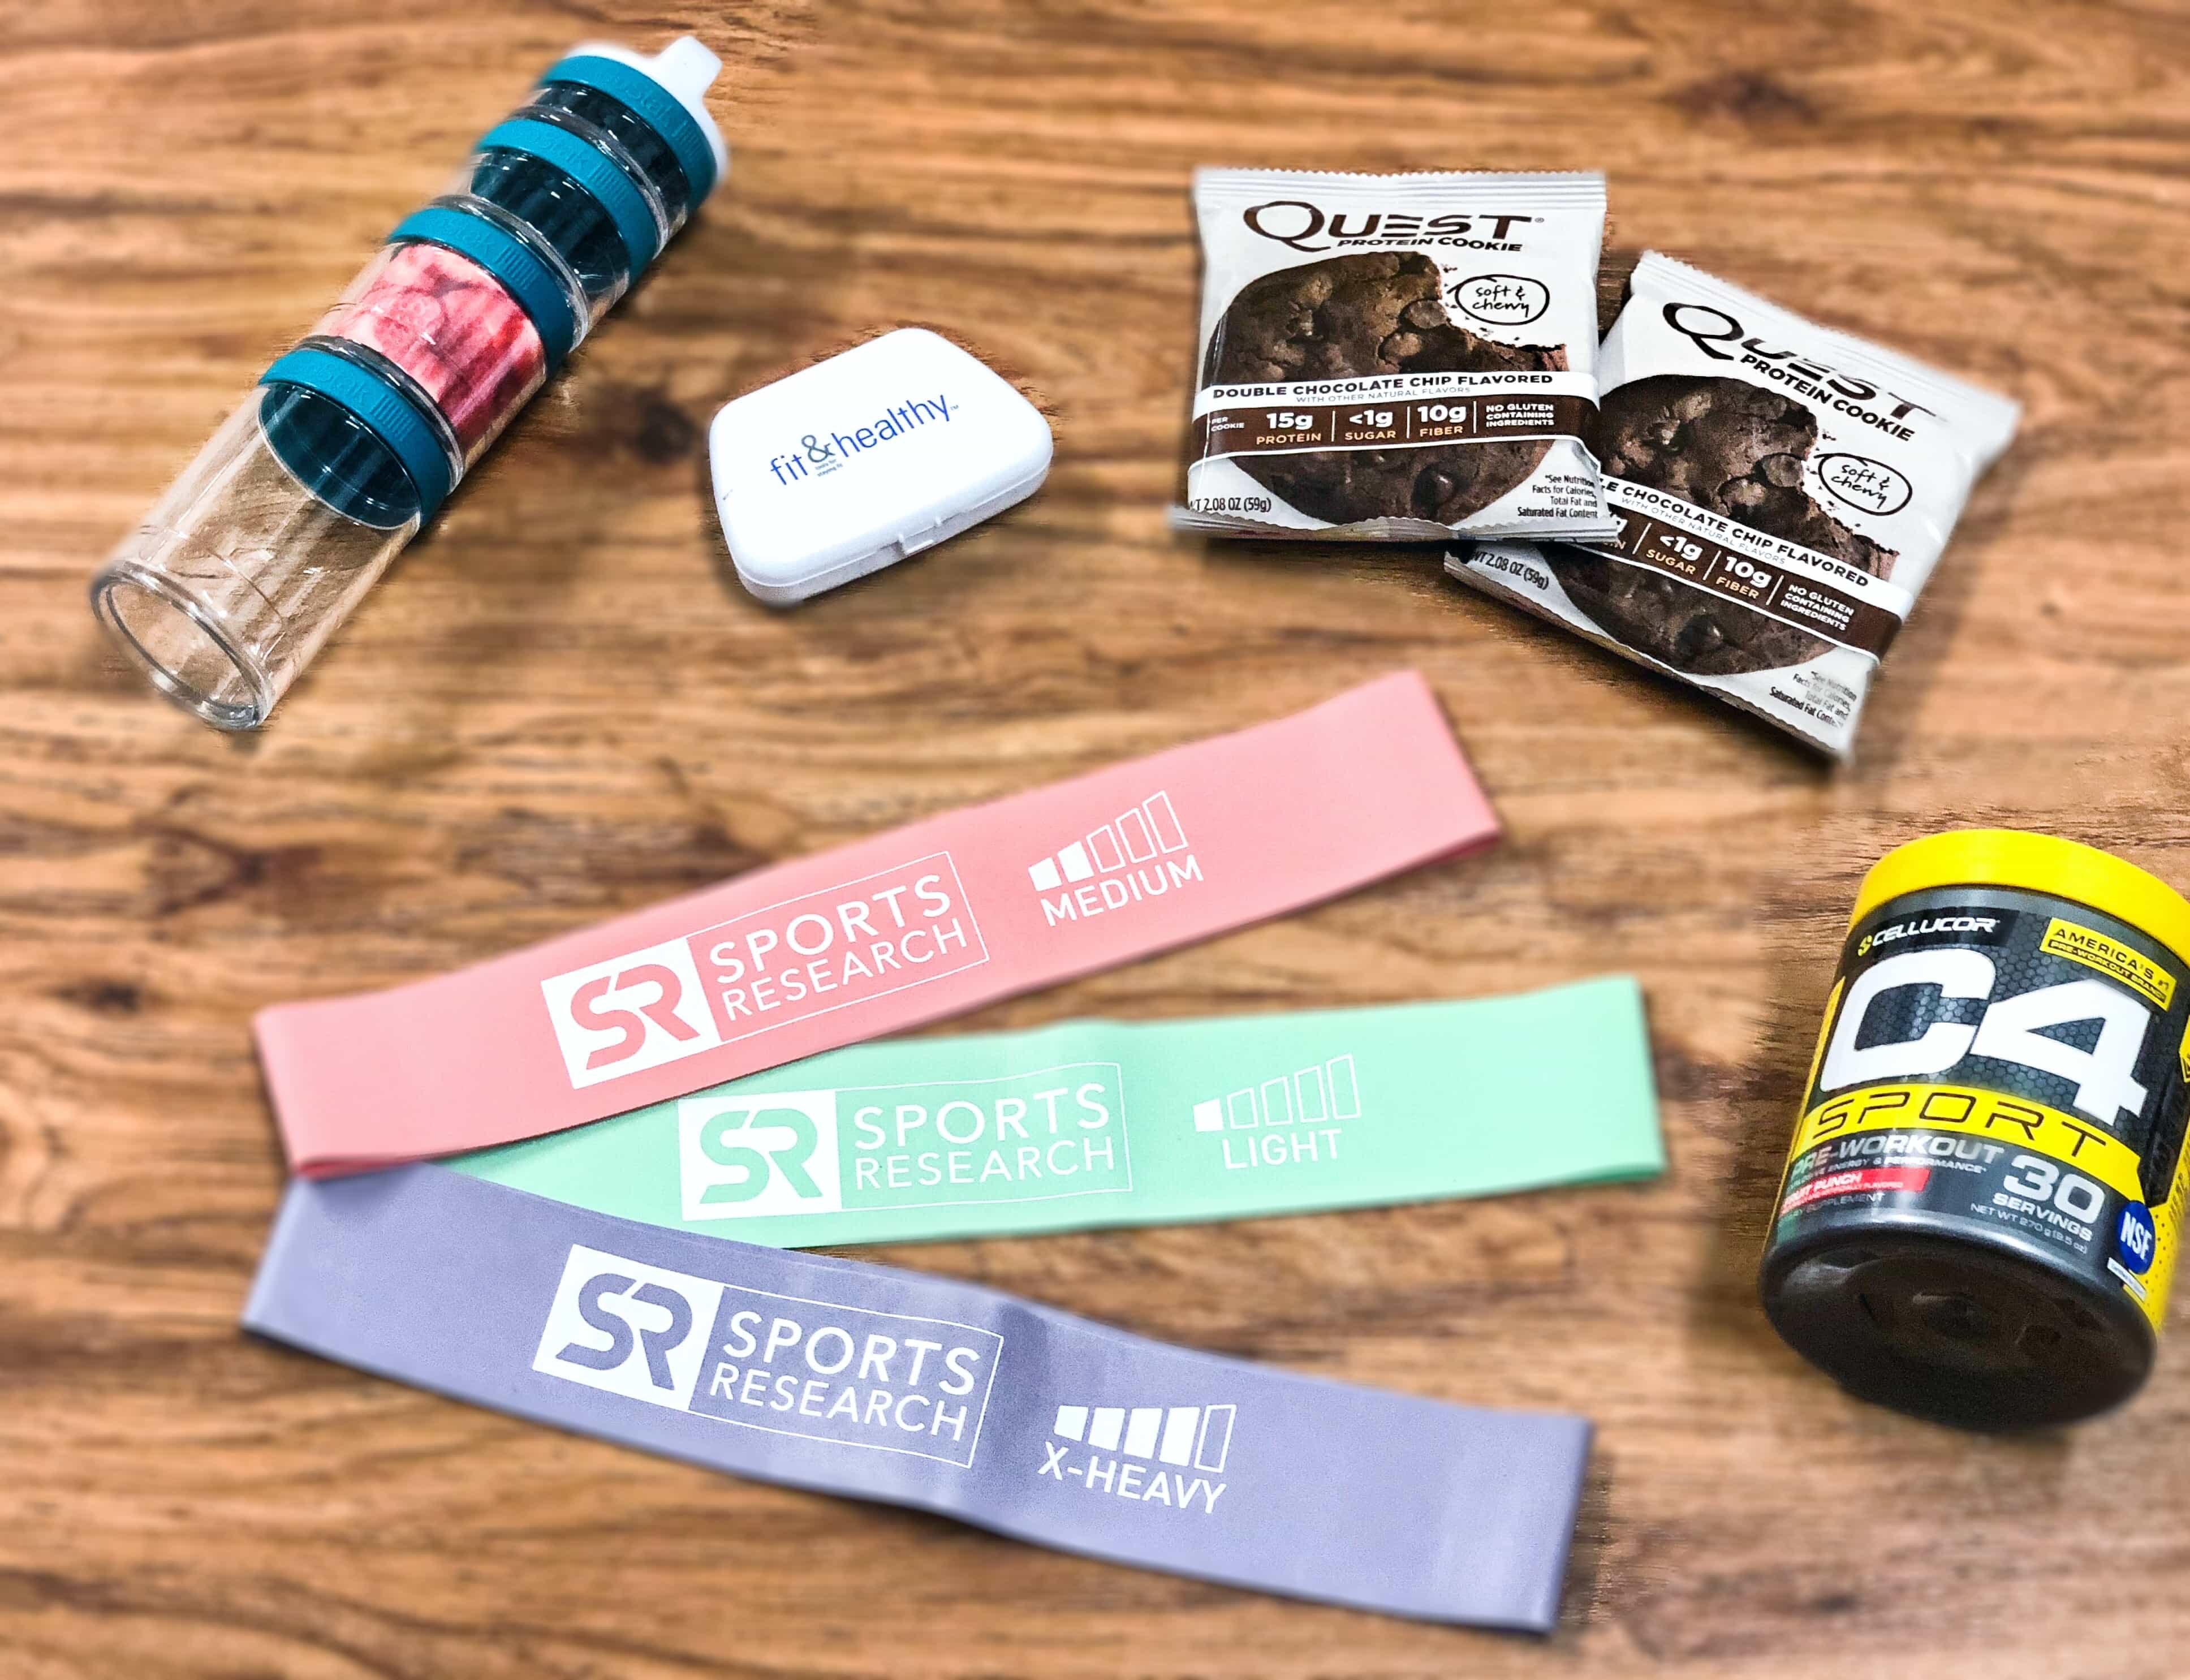 Top 9 Fitness Gifts Under $25